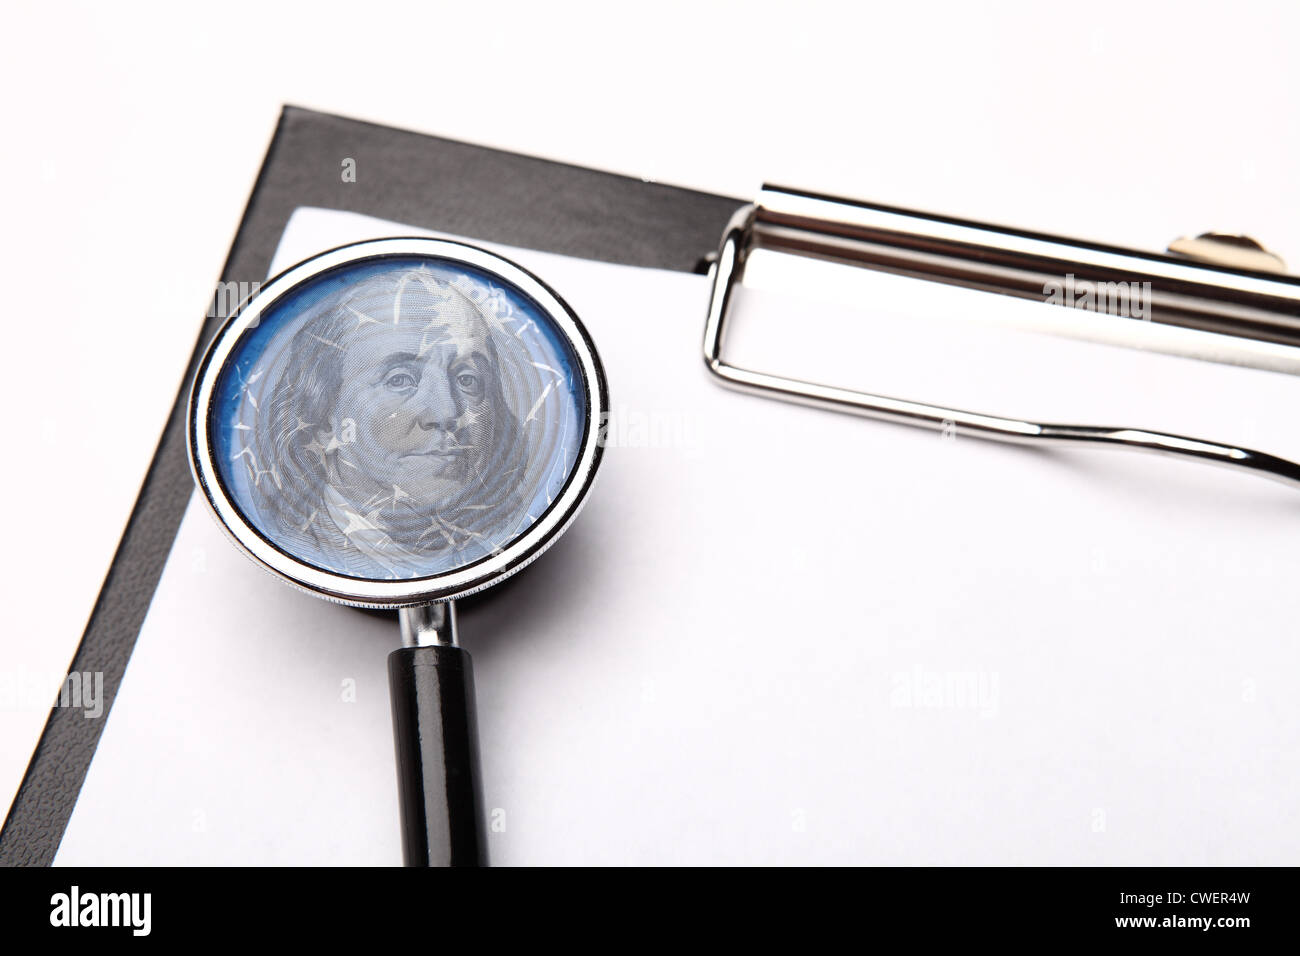 clipboard and portrait of Benjamin Franklin on the stethoscope diaphragm Stock Photo